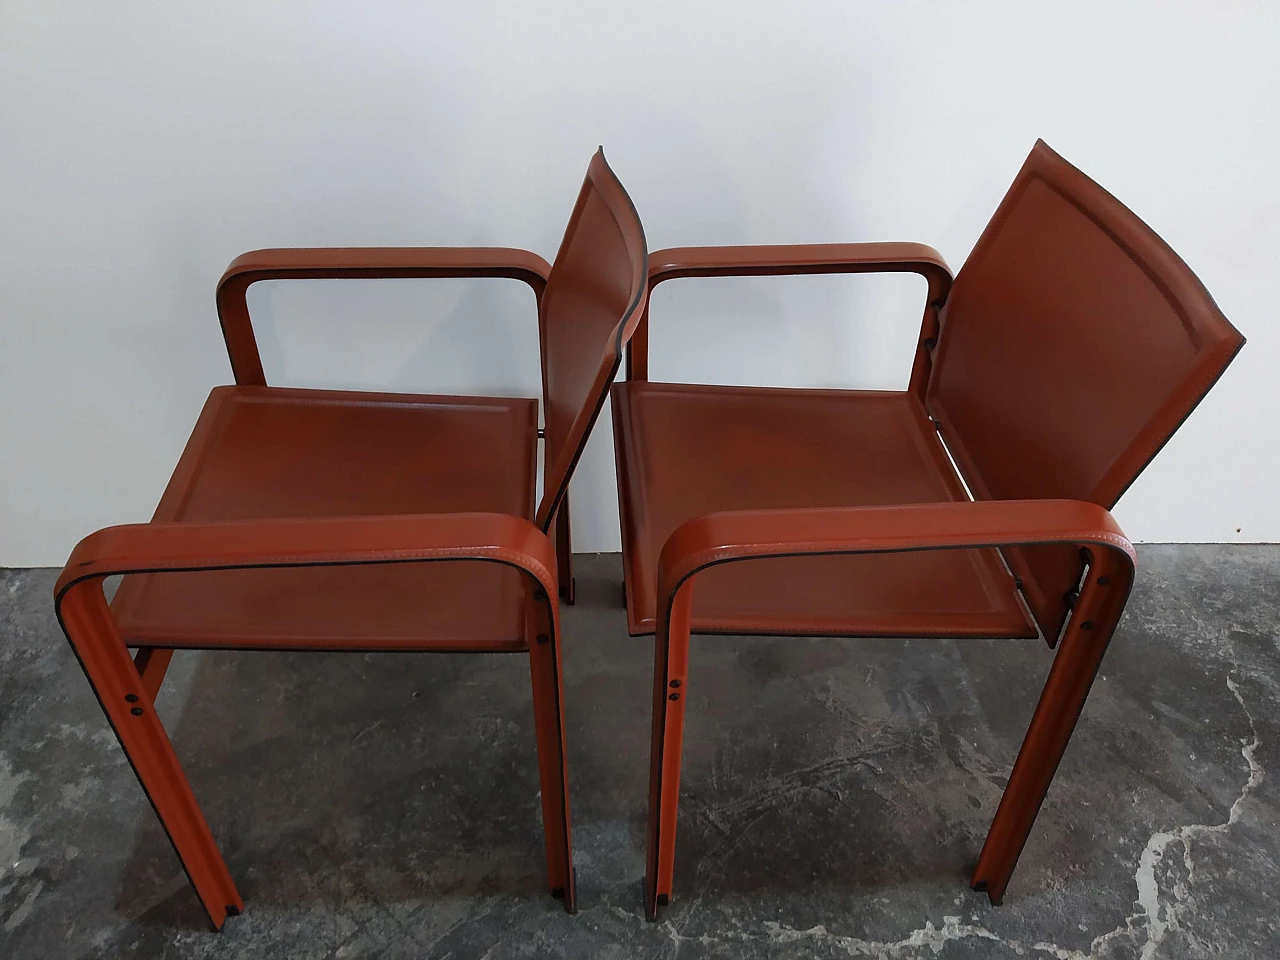 Pair of Golfo dei Poeti chairs by Toussaint & Angeloni manufactured by Matteo Grassi, 1980s 26